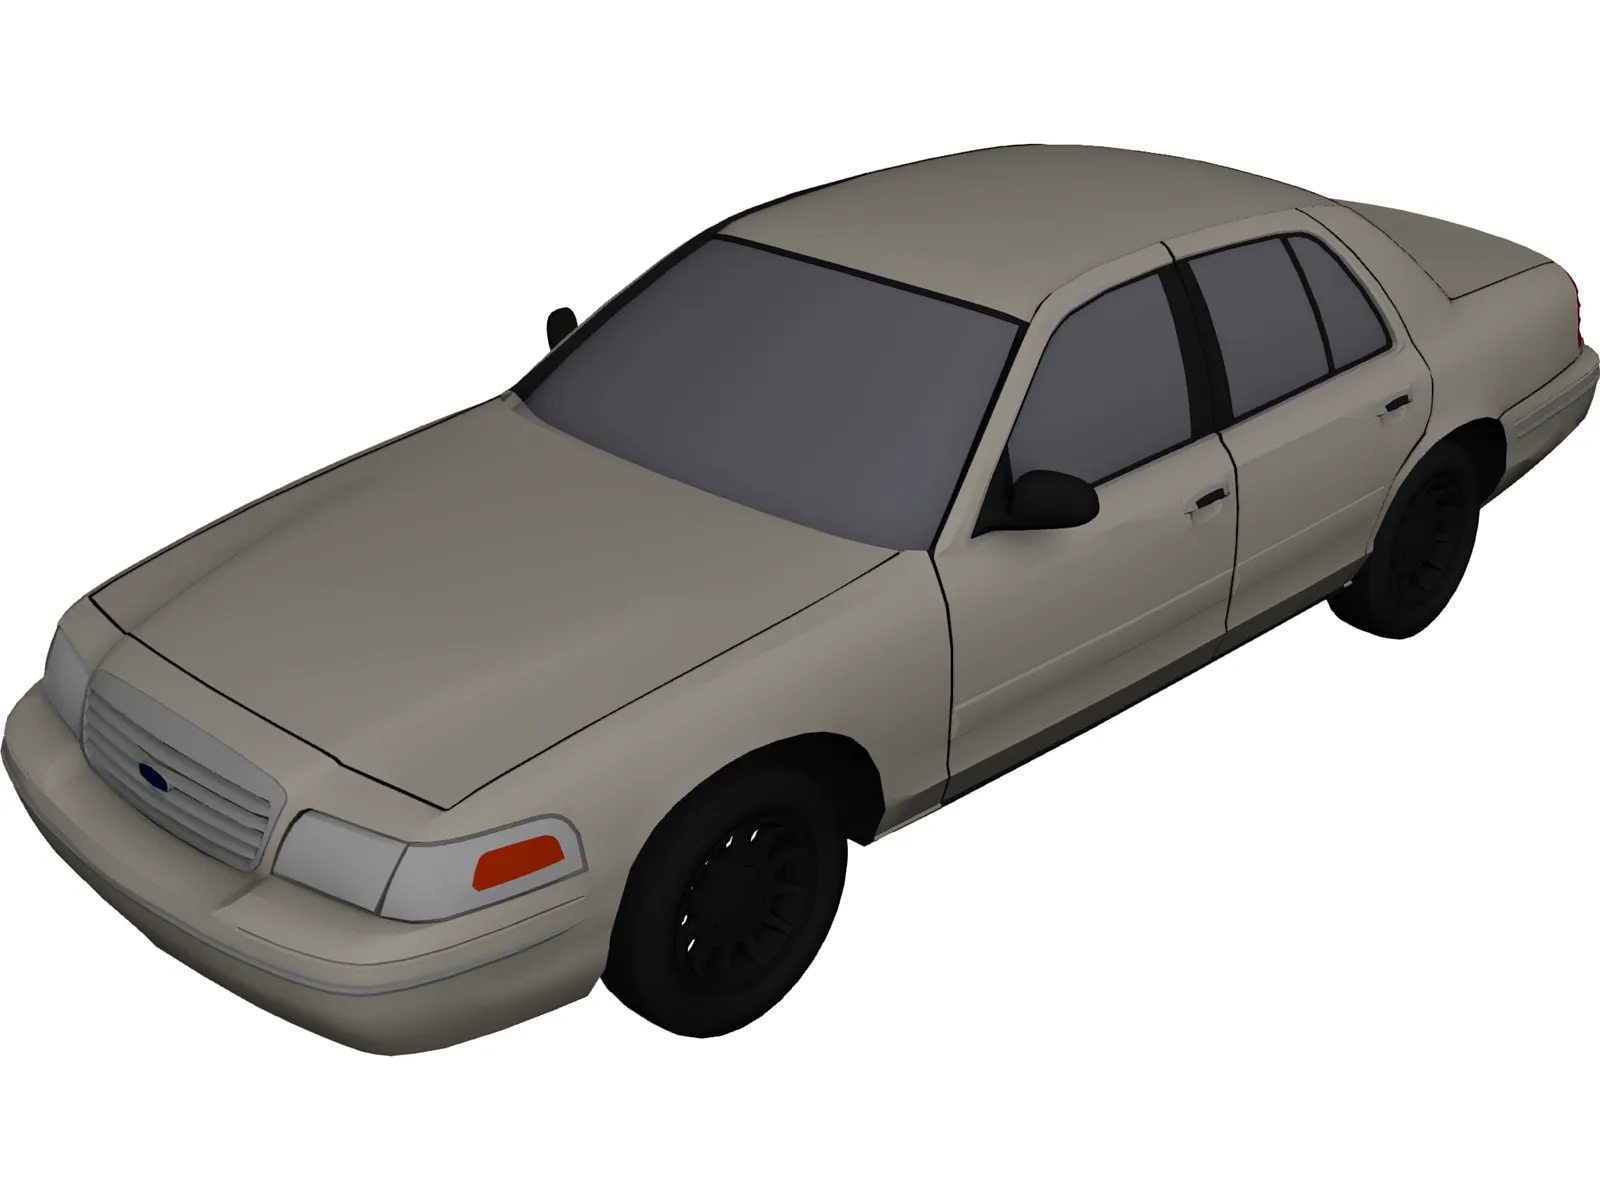 Ford Crown Victoria (2000) 3D Model